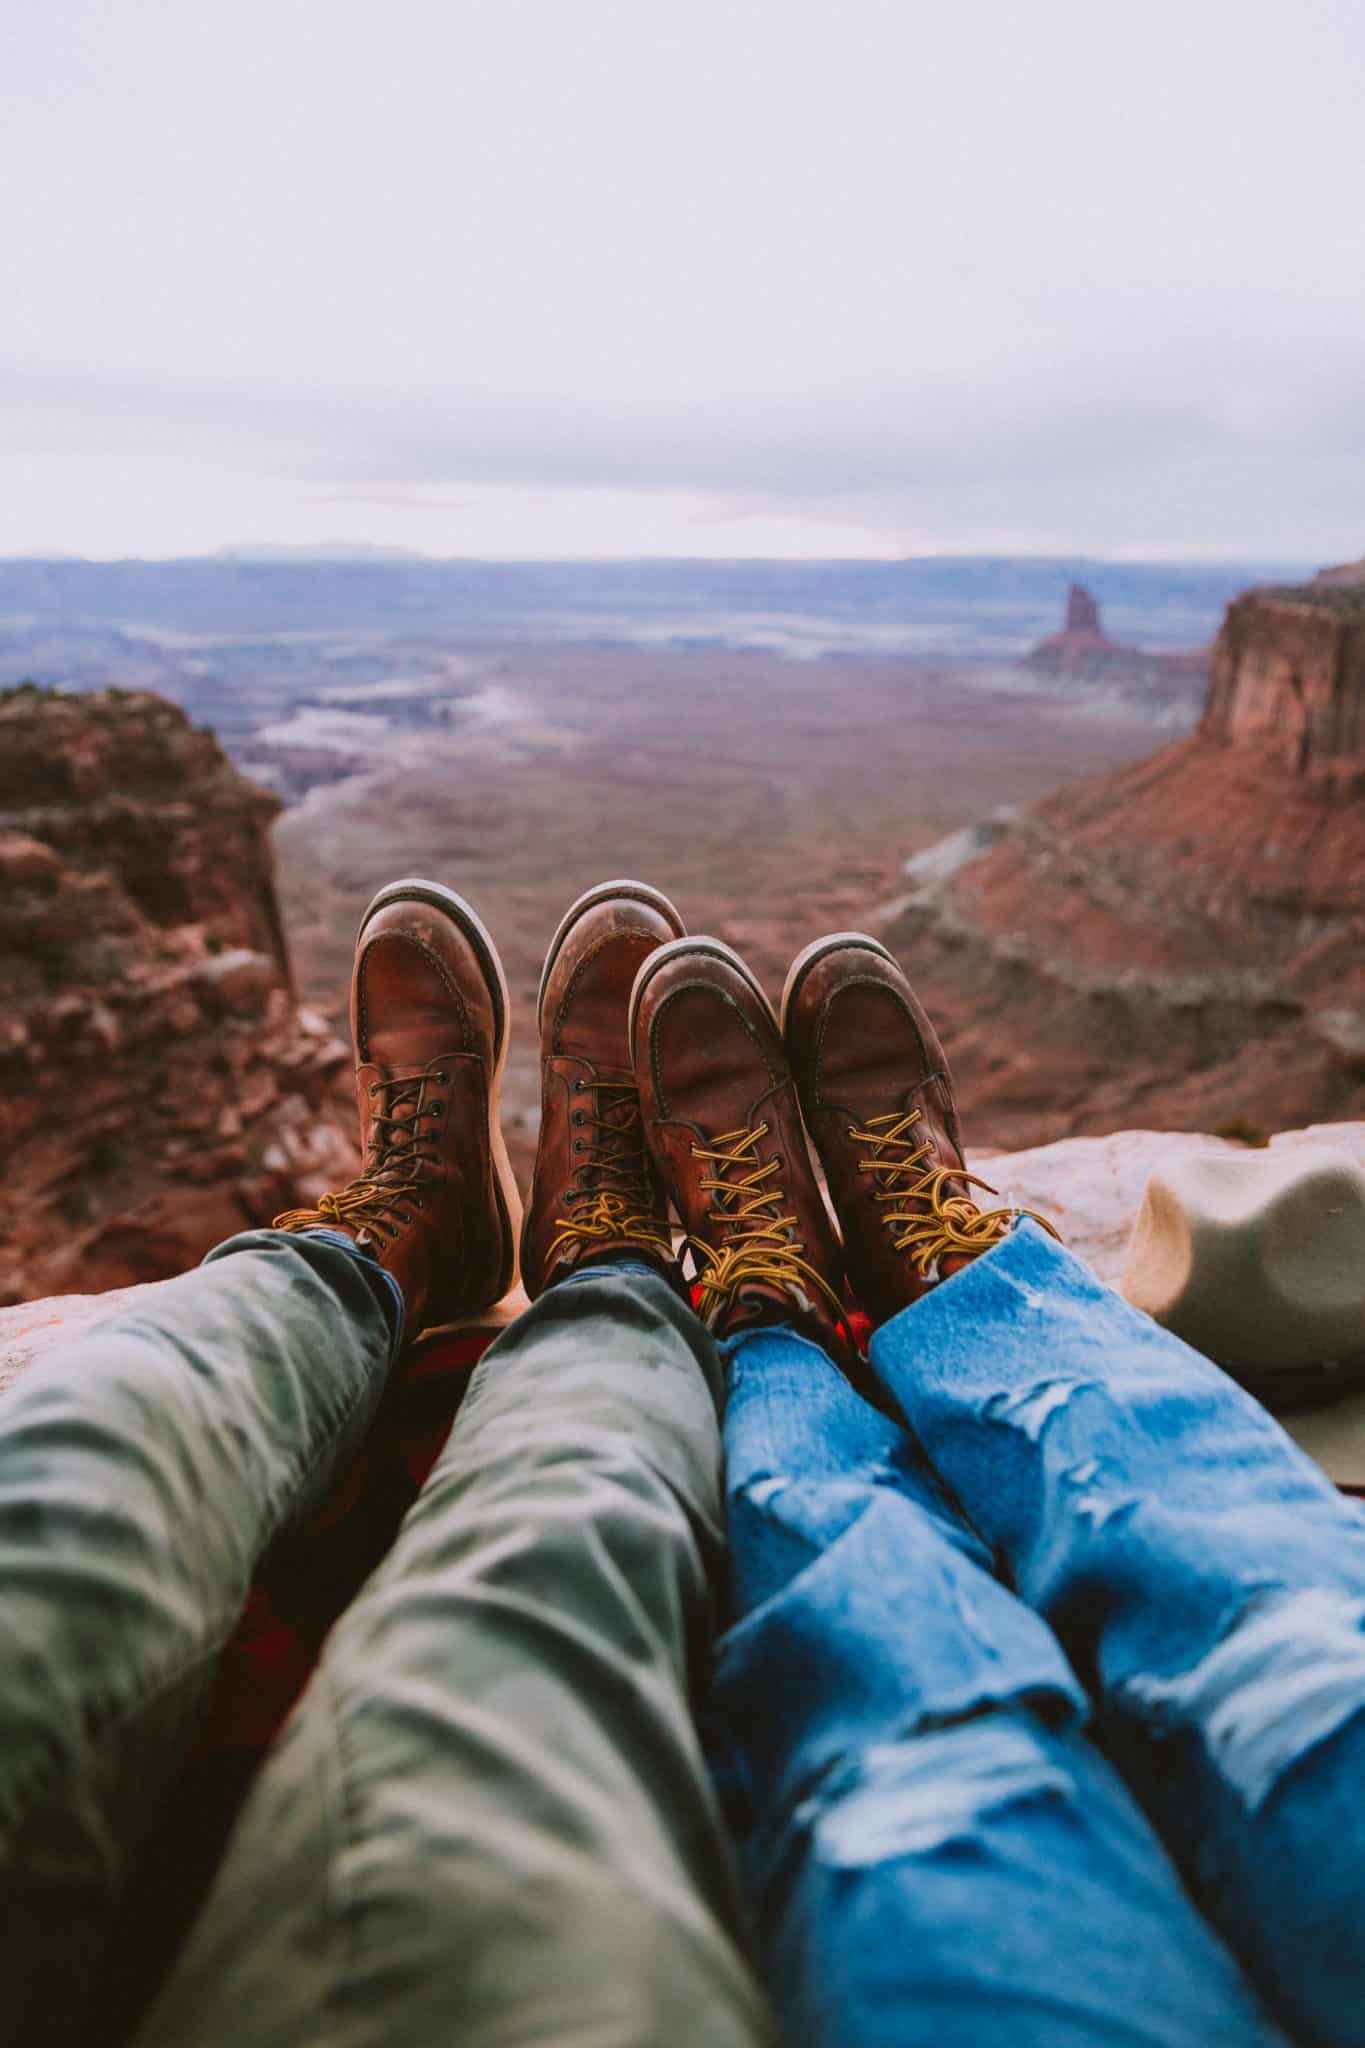 Traveling as a couple soon? Berty and I are sharing 6 lessons we learned while exploring the world together. Read our 6 essential takeaways that everyone couple should know before heading out on their next adventure! #couplestravel #travel #couples